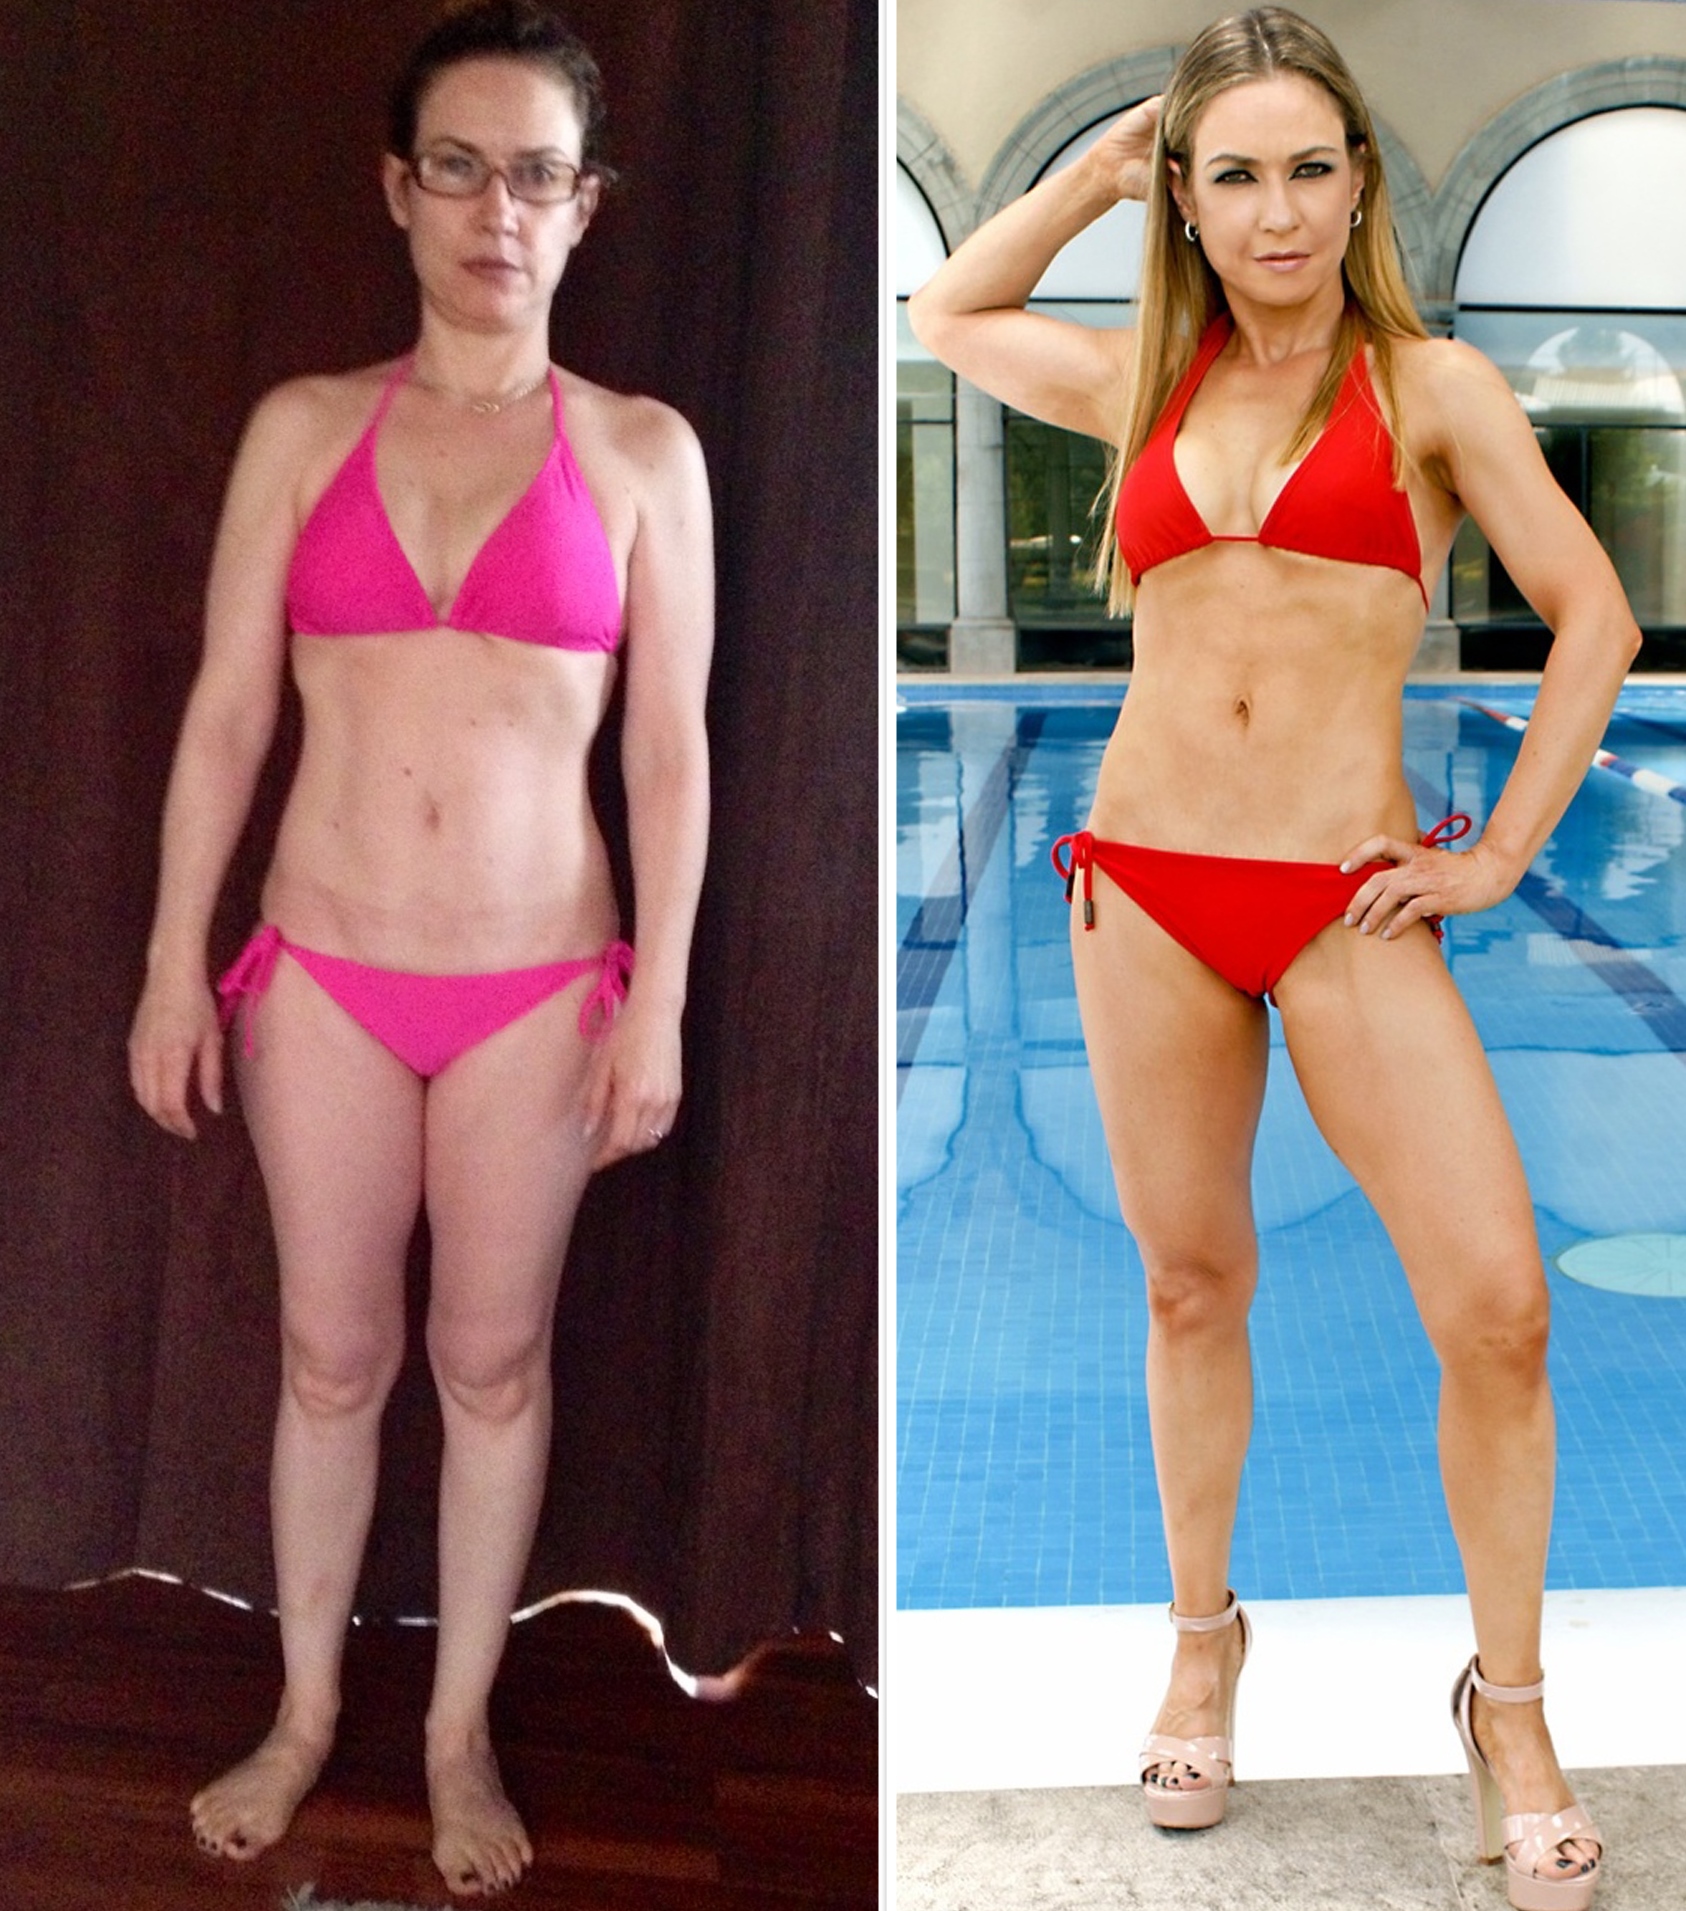 Barbara - First Place - Before and After